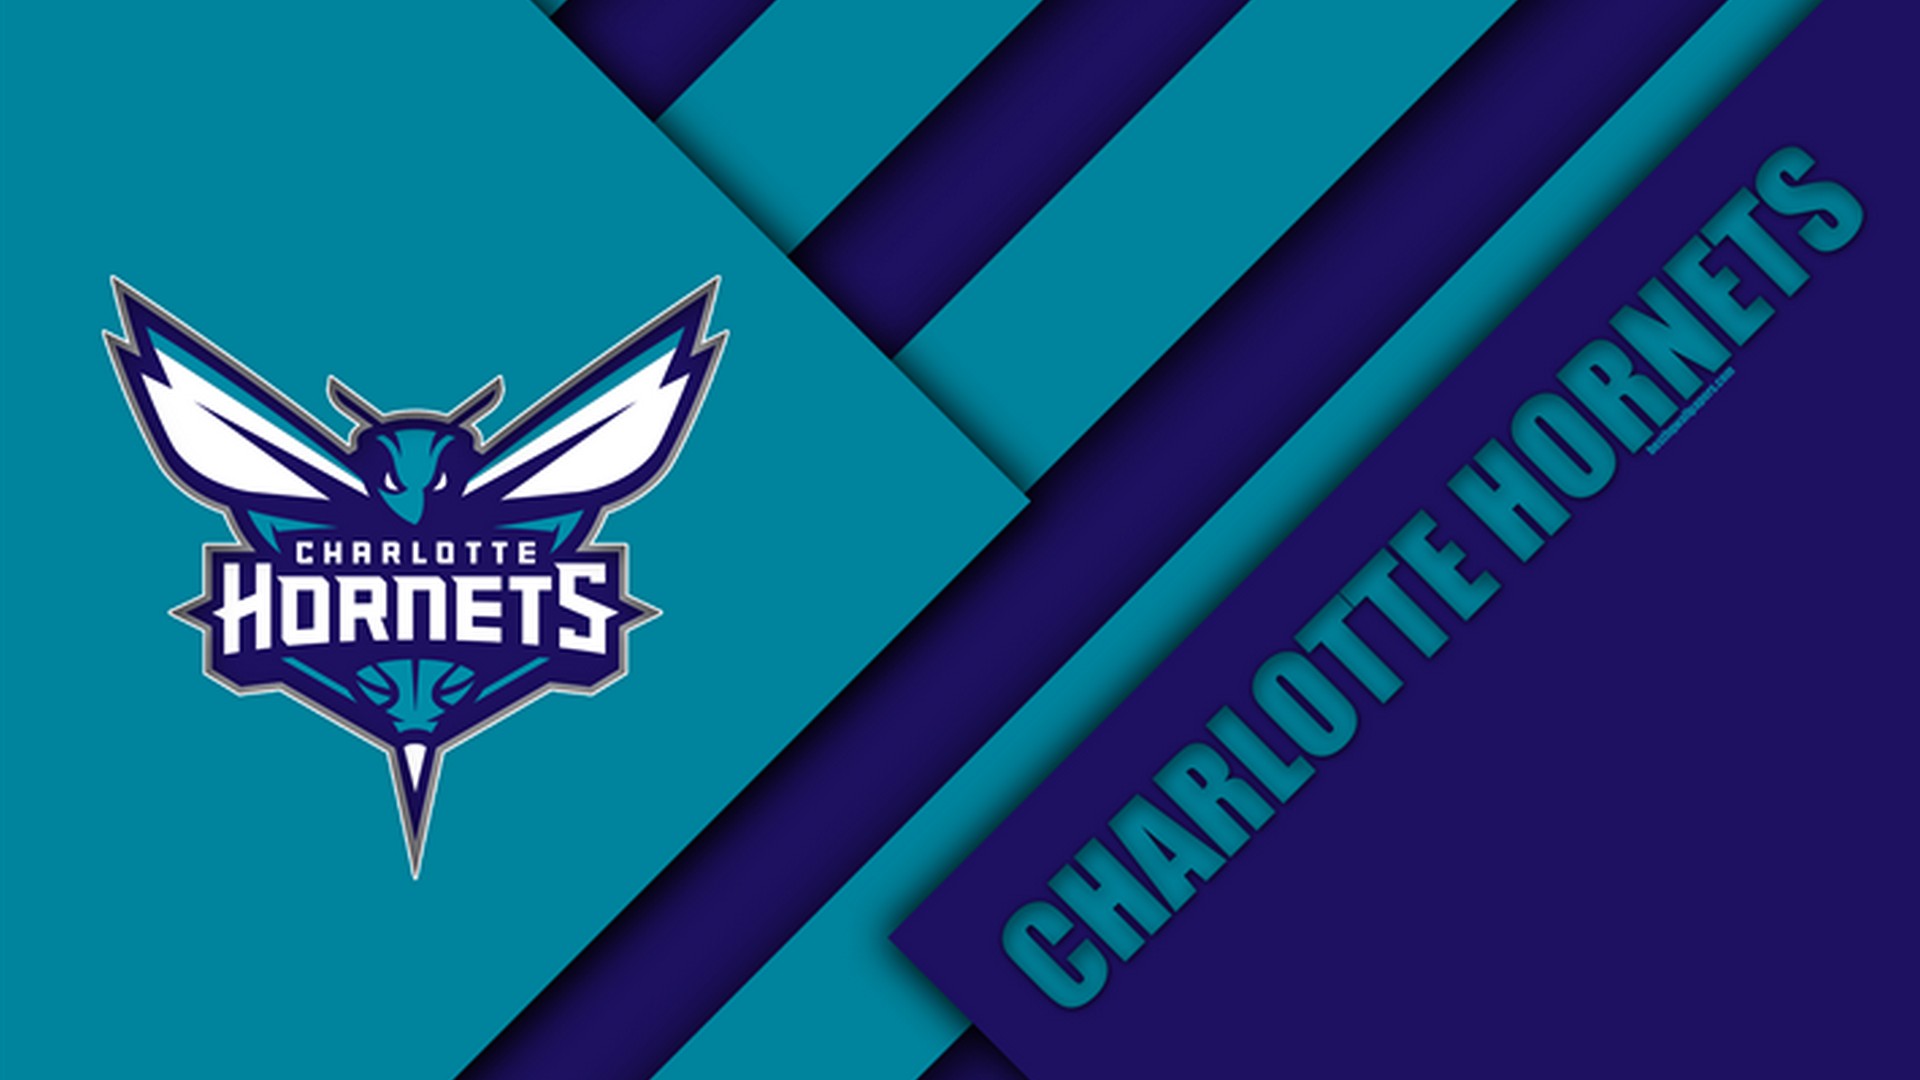 Wallpapers Charlotte Hornets with high-resolution 1920x1080 pixel. You can use this wallpaper for your Desktop Computer Backgrounds, Windows or Mac Screensavers, iPhone Lock screen, Tablet or Android and another Mobile Phone device